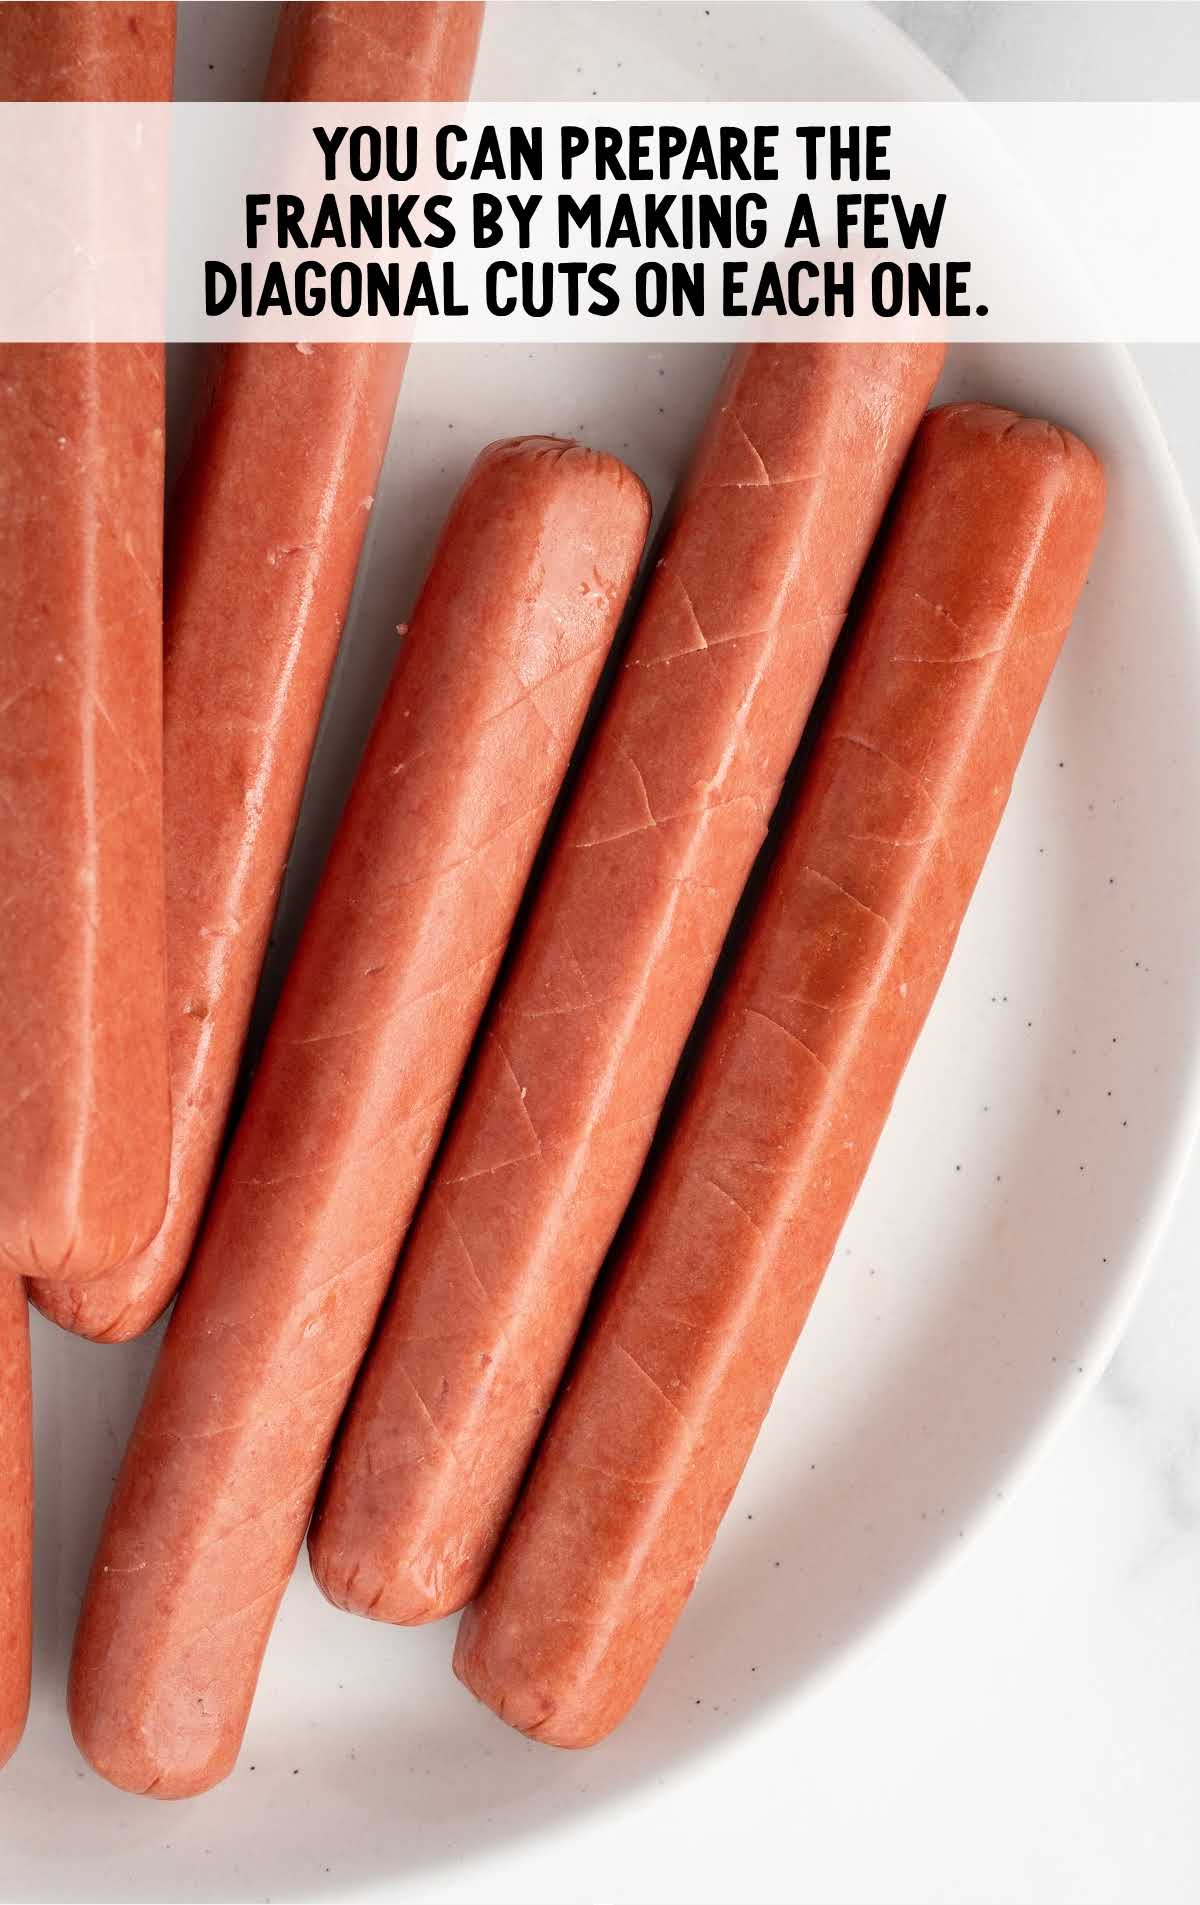 diagonal cuts made on the hot dogs